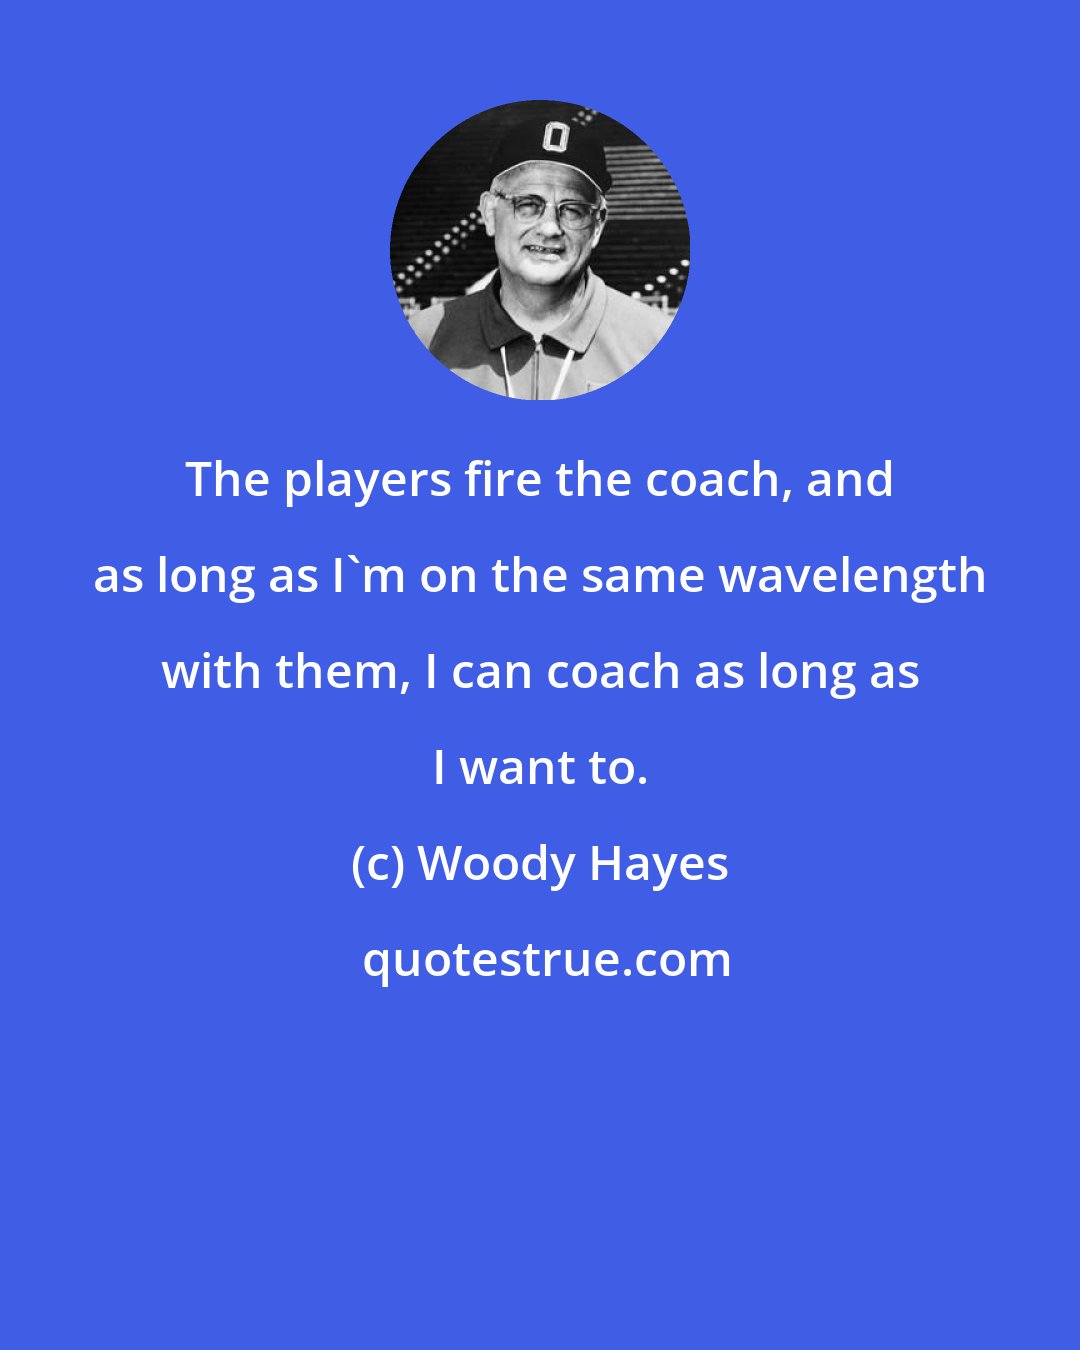 Woody Hayes: The players fire the coach, and as long as I'm on the same wavelength with them, I can coach as long as I want to.